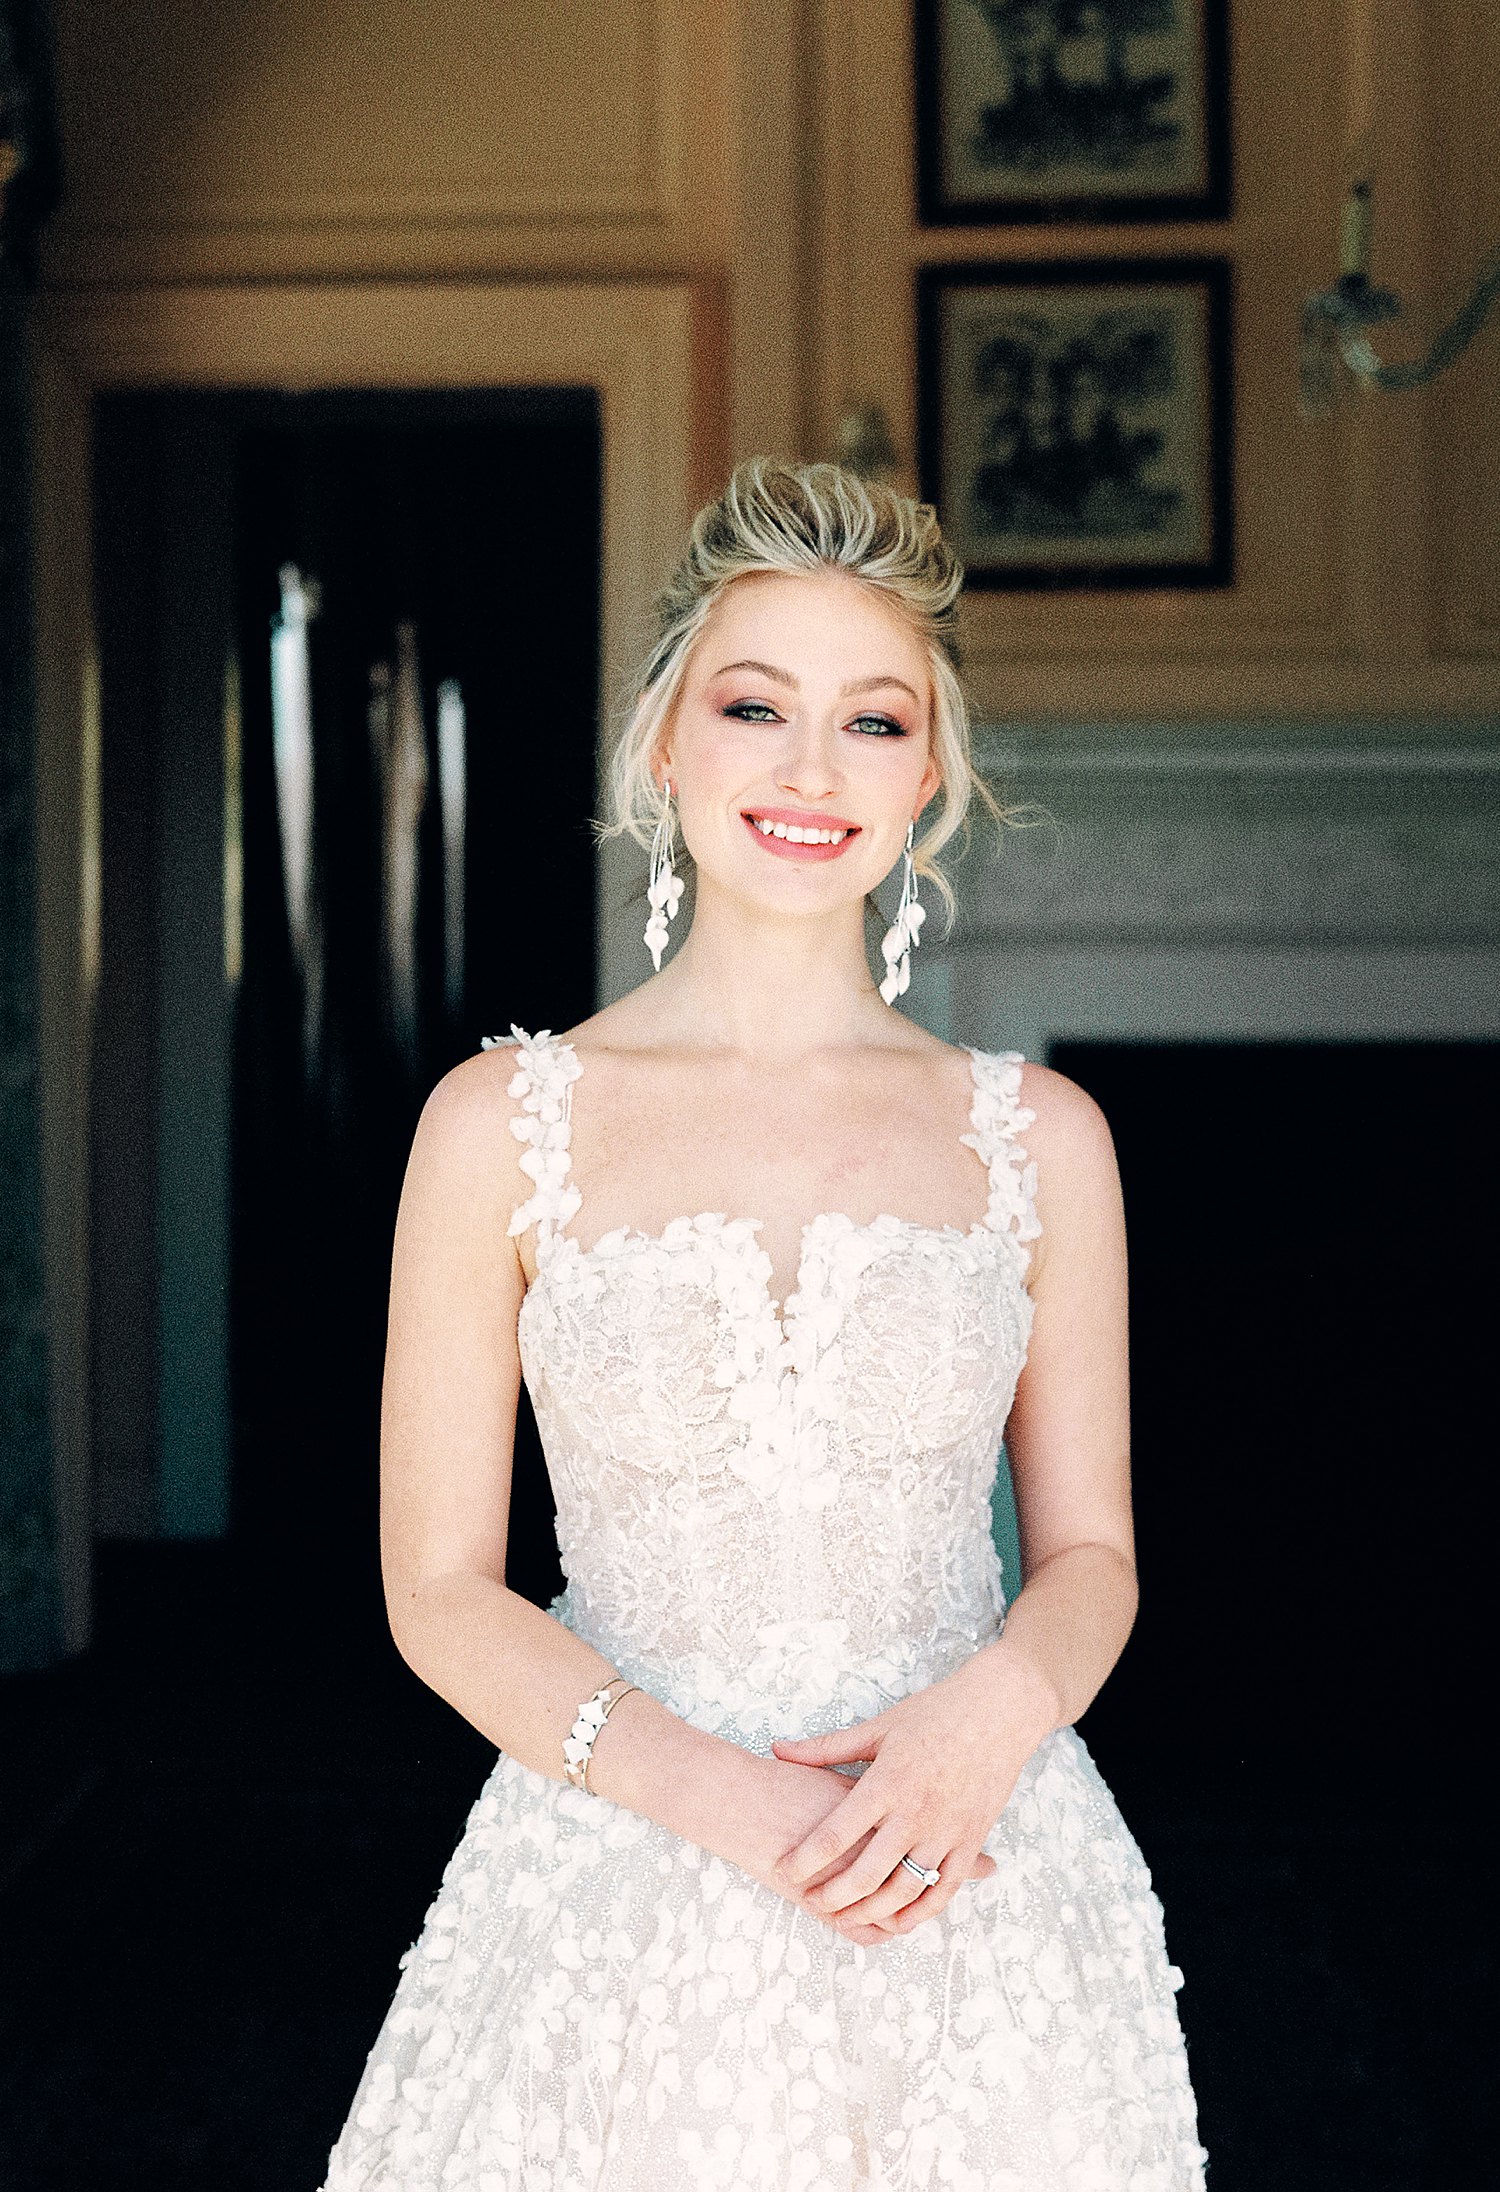 portrait of bride in white wedding dress smiling with hands clasped